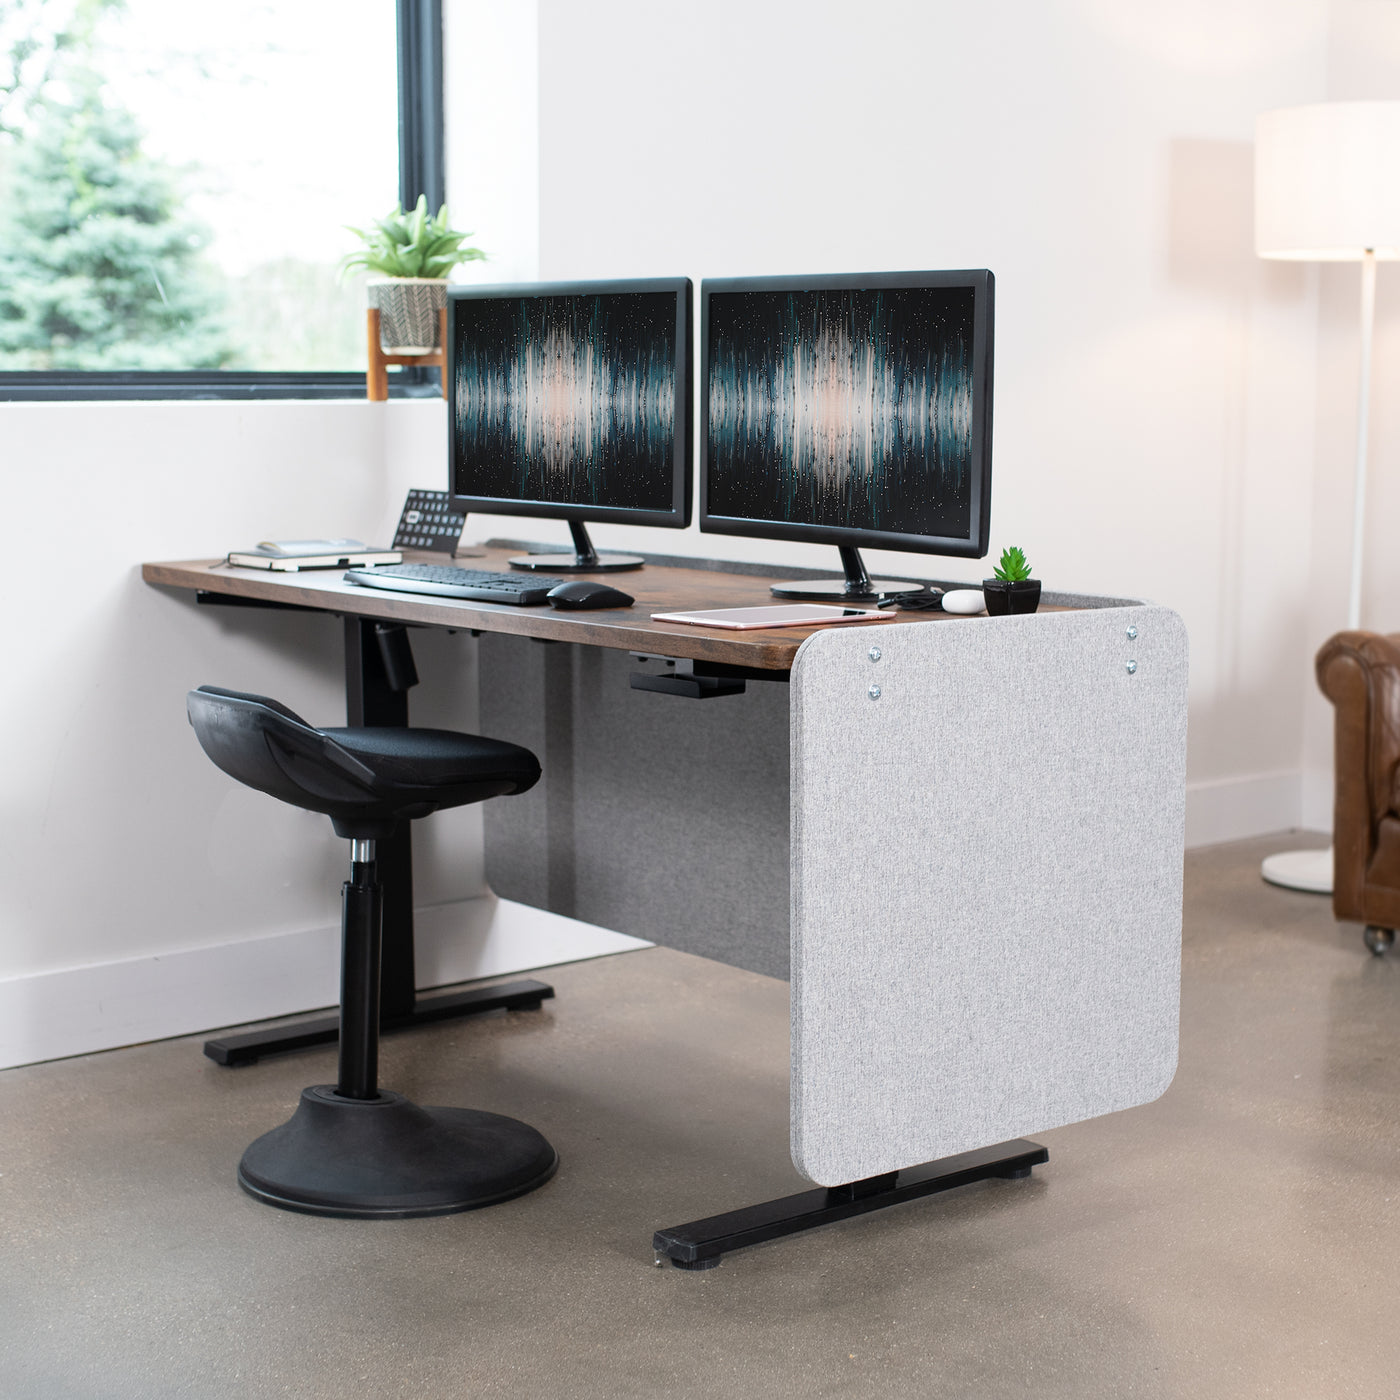 Clamp-on desk privacy panel for office workspace.